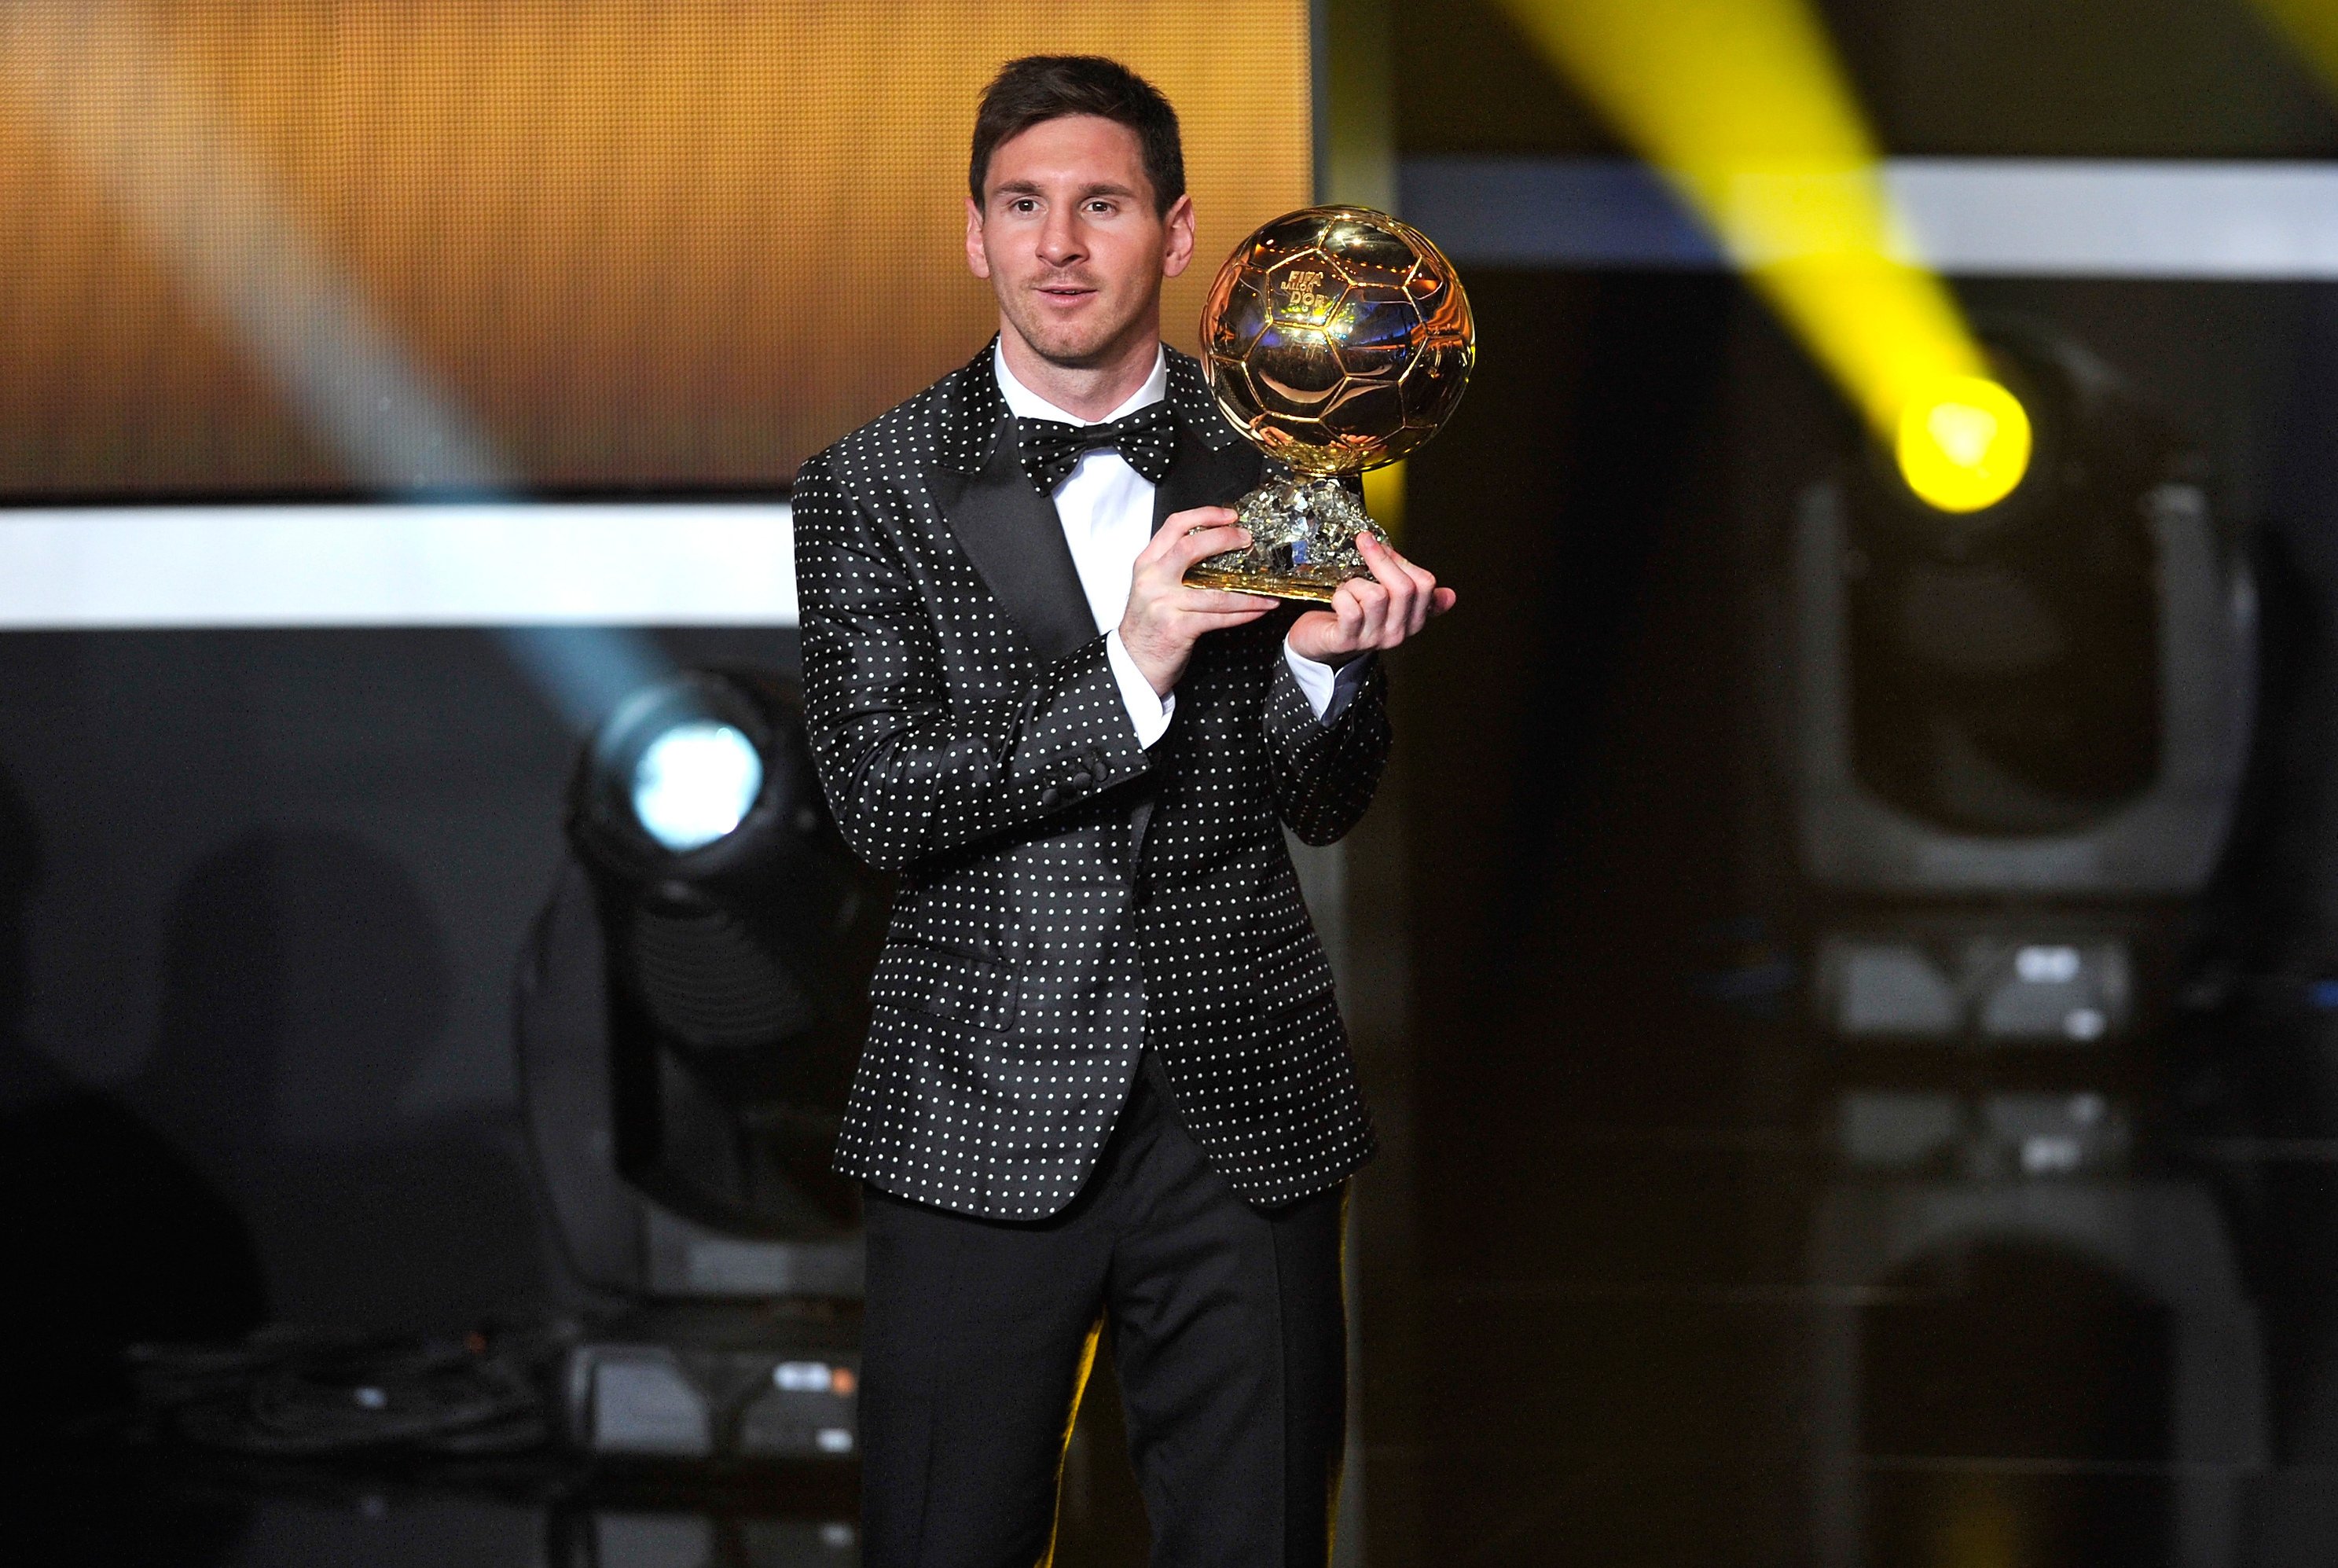 Lionel Messi set for Ballon d'Or but Neymar threatens the old duopoly, Ballon d'Or